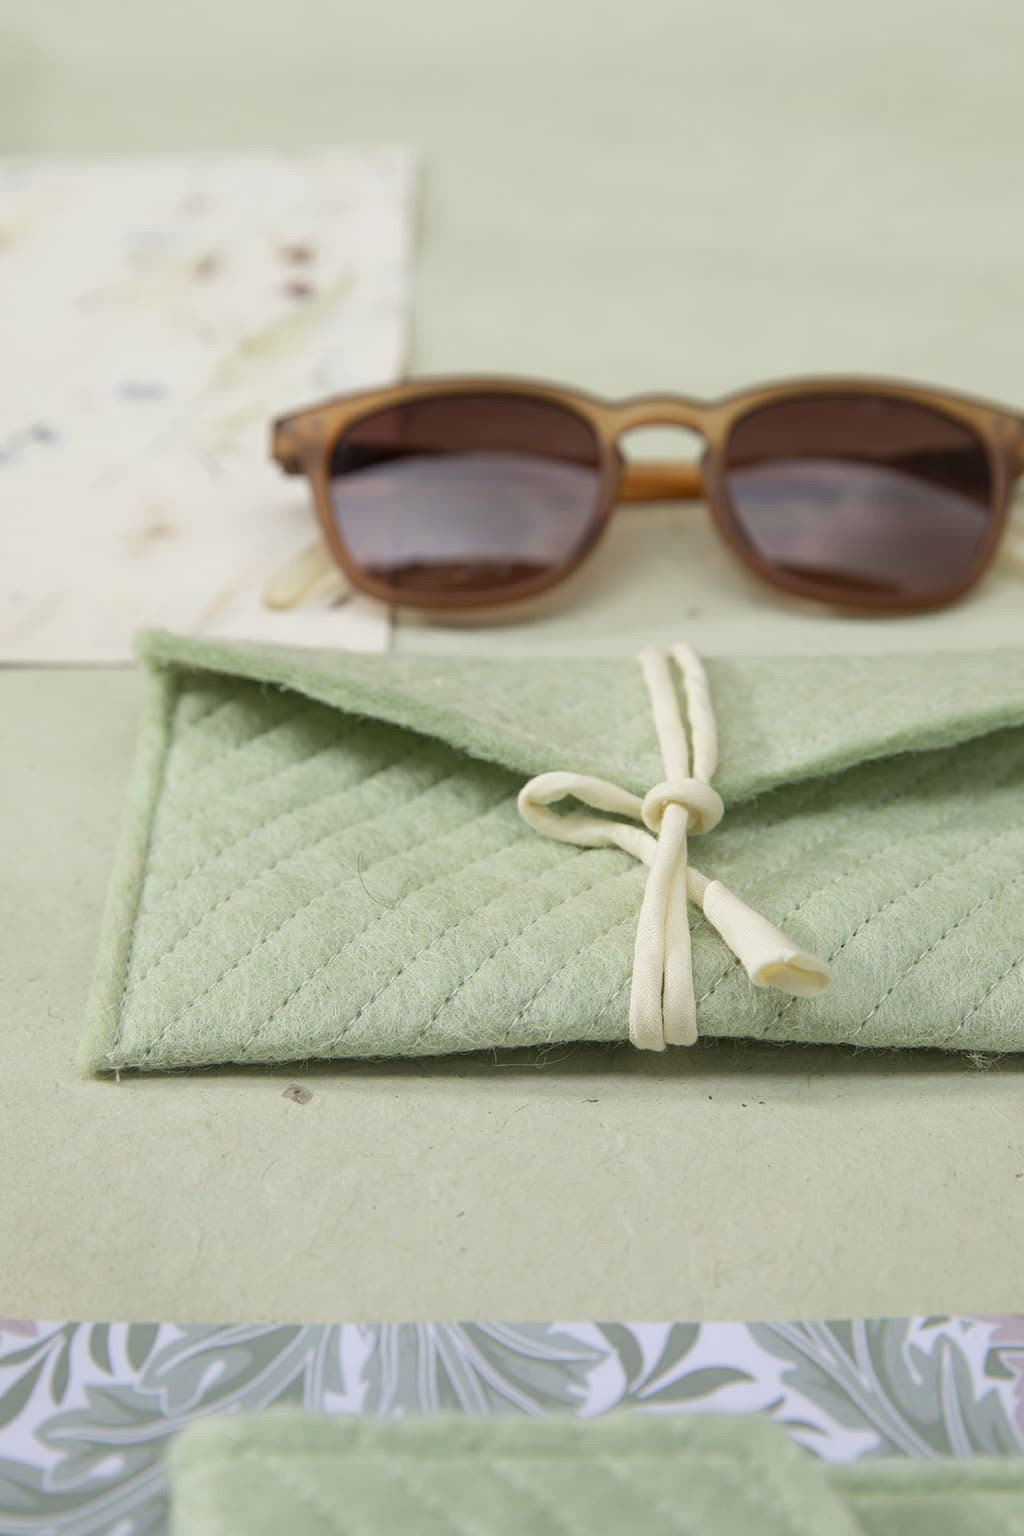 An elegant glasses case in mint green wool felt with a cotton cord